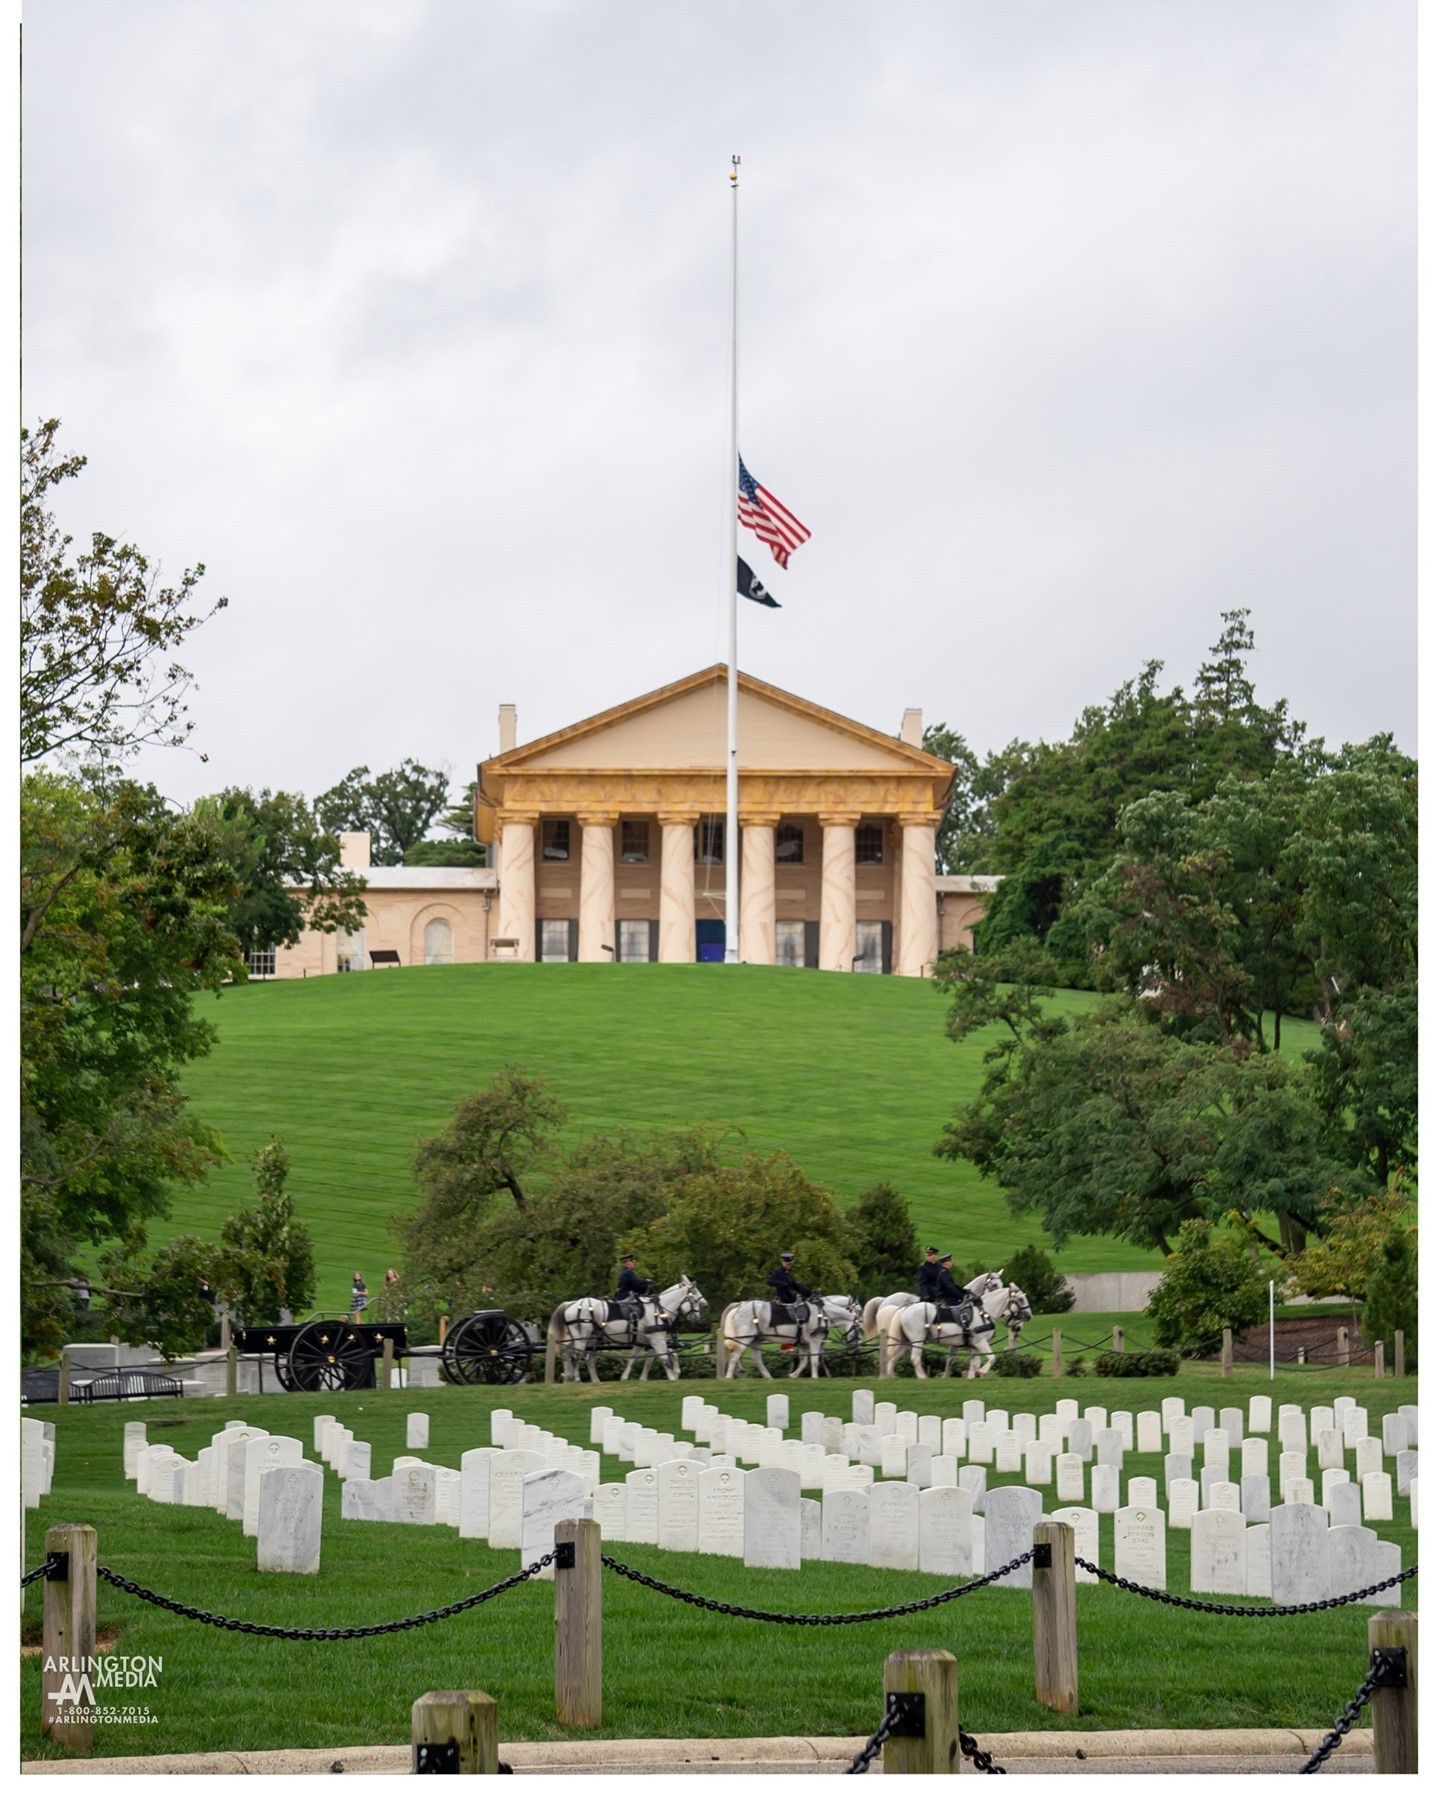 A US Army Caisson team passes in front of the Arlington House during preparation for a day of funerals in Arlington National Cemetery.